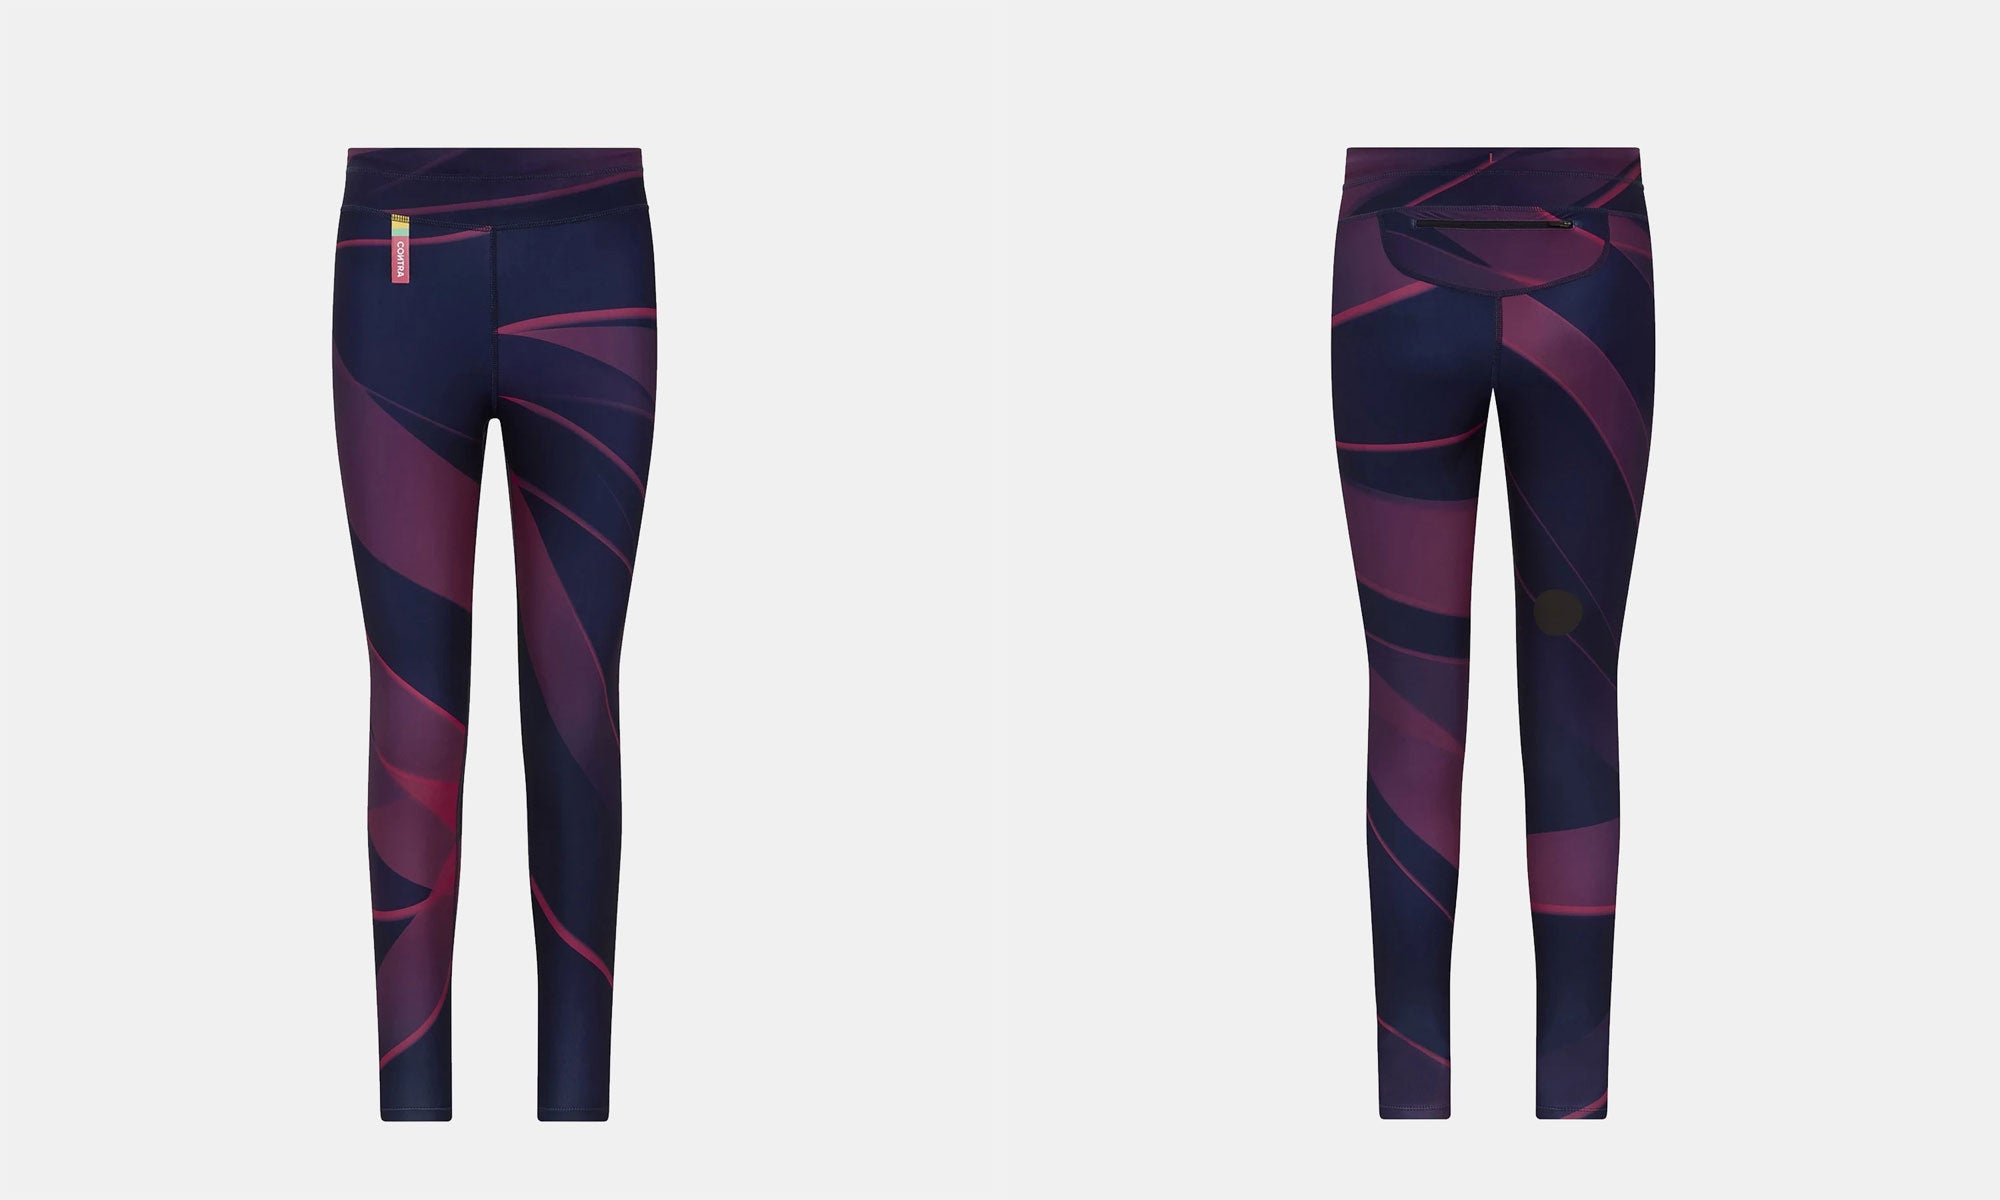 Patterned running tights for women